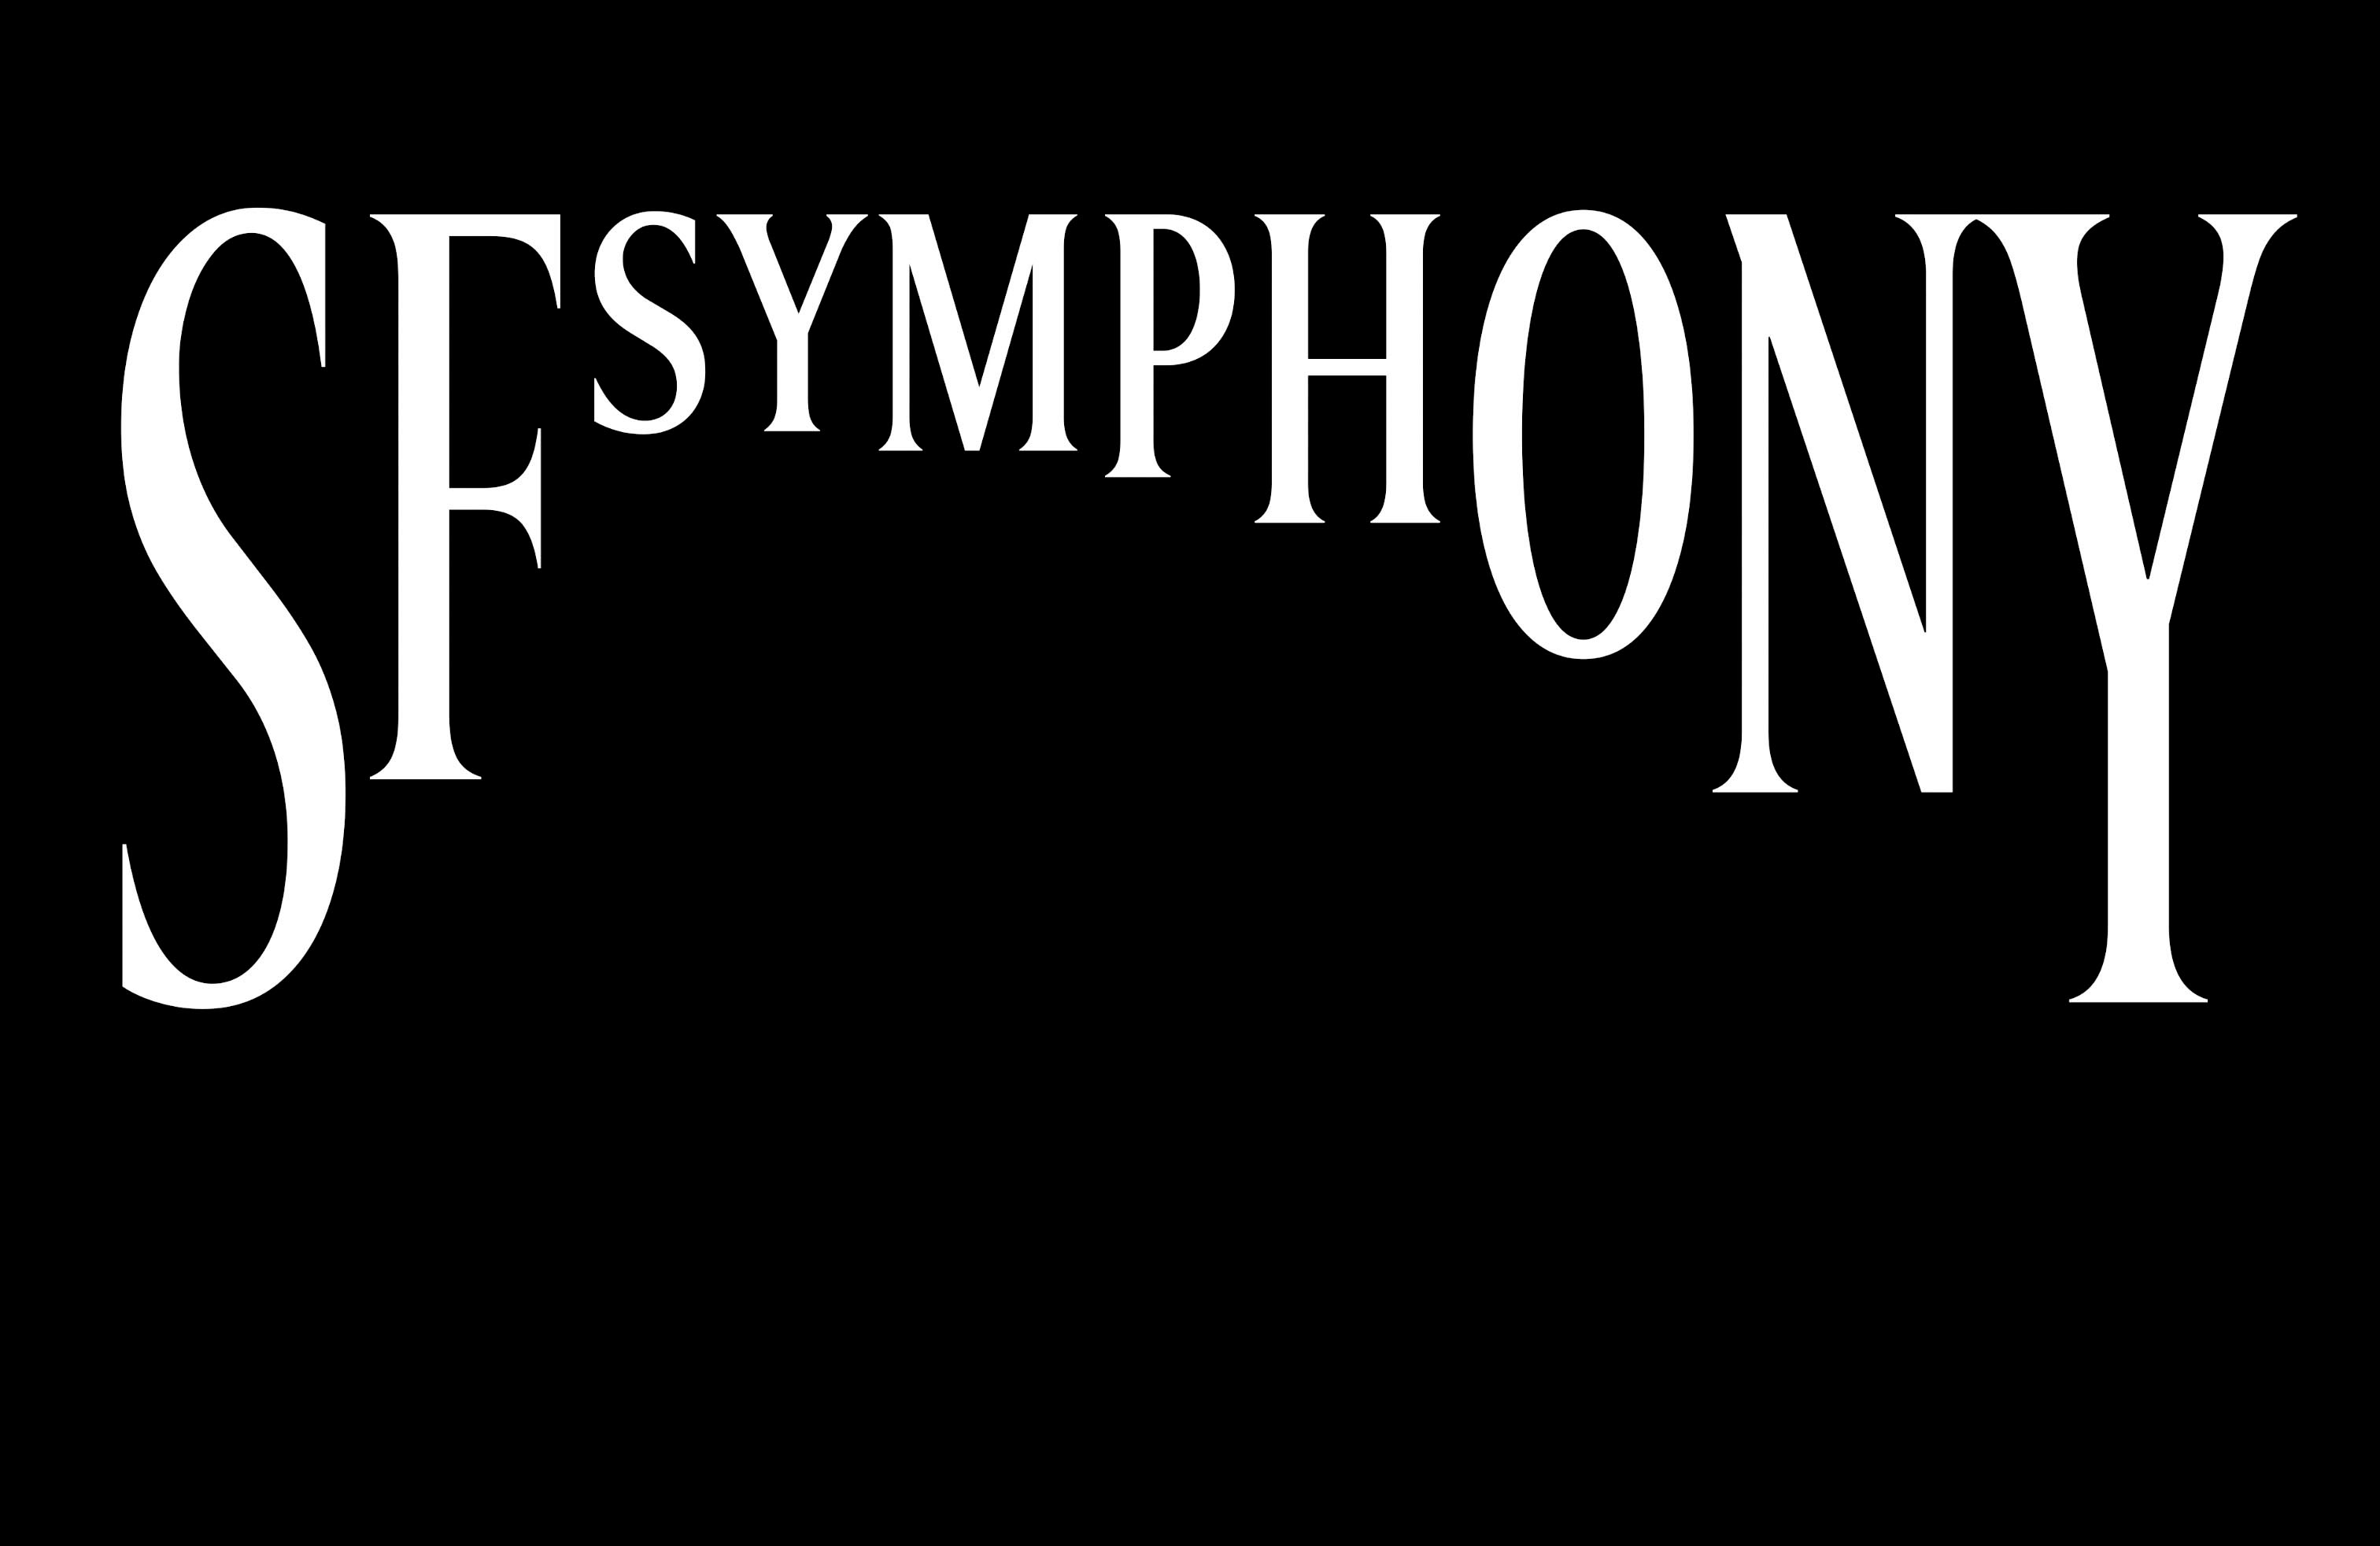 Dynamic logotype by Collins for San Francisco Symphony